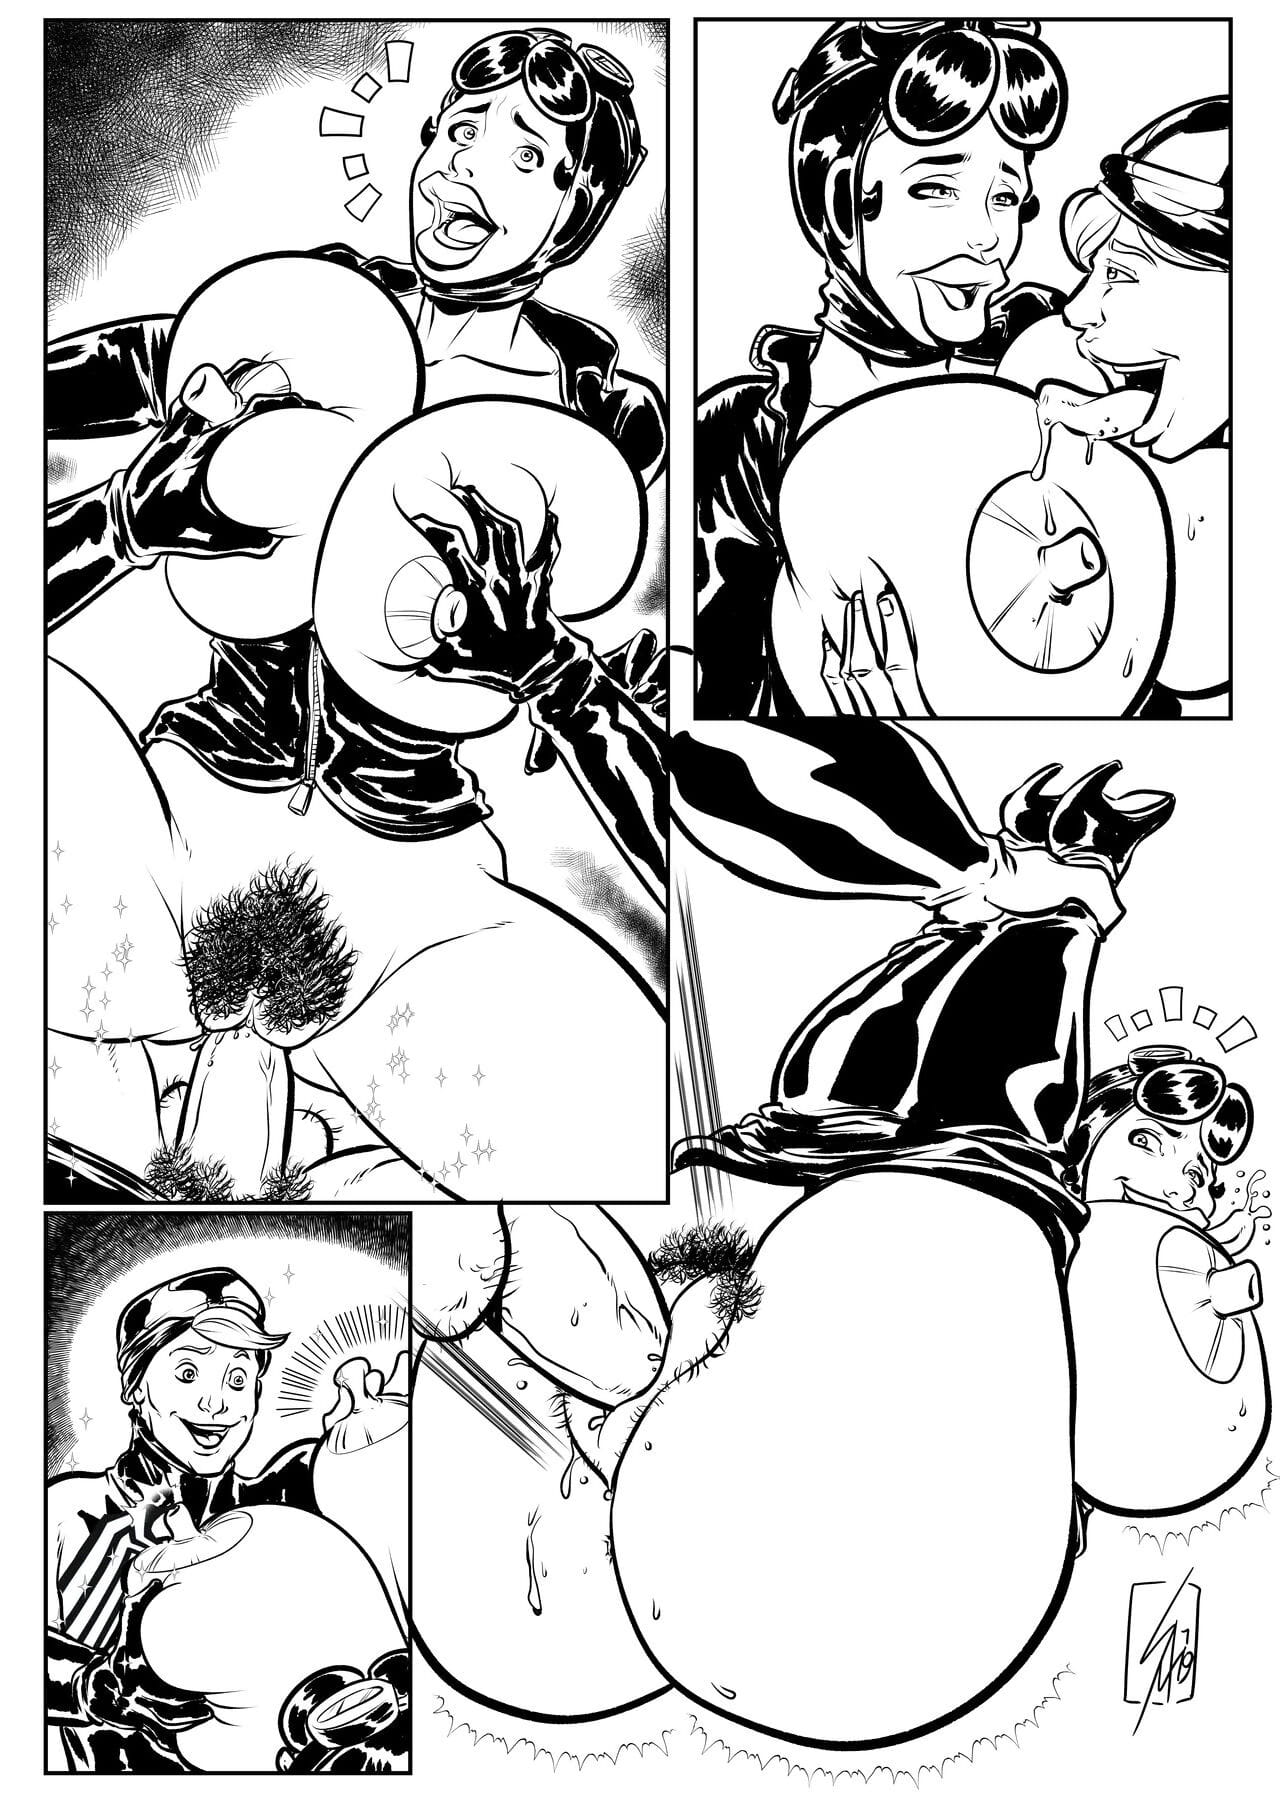 Miss Joan as Catwoman page 1